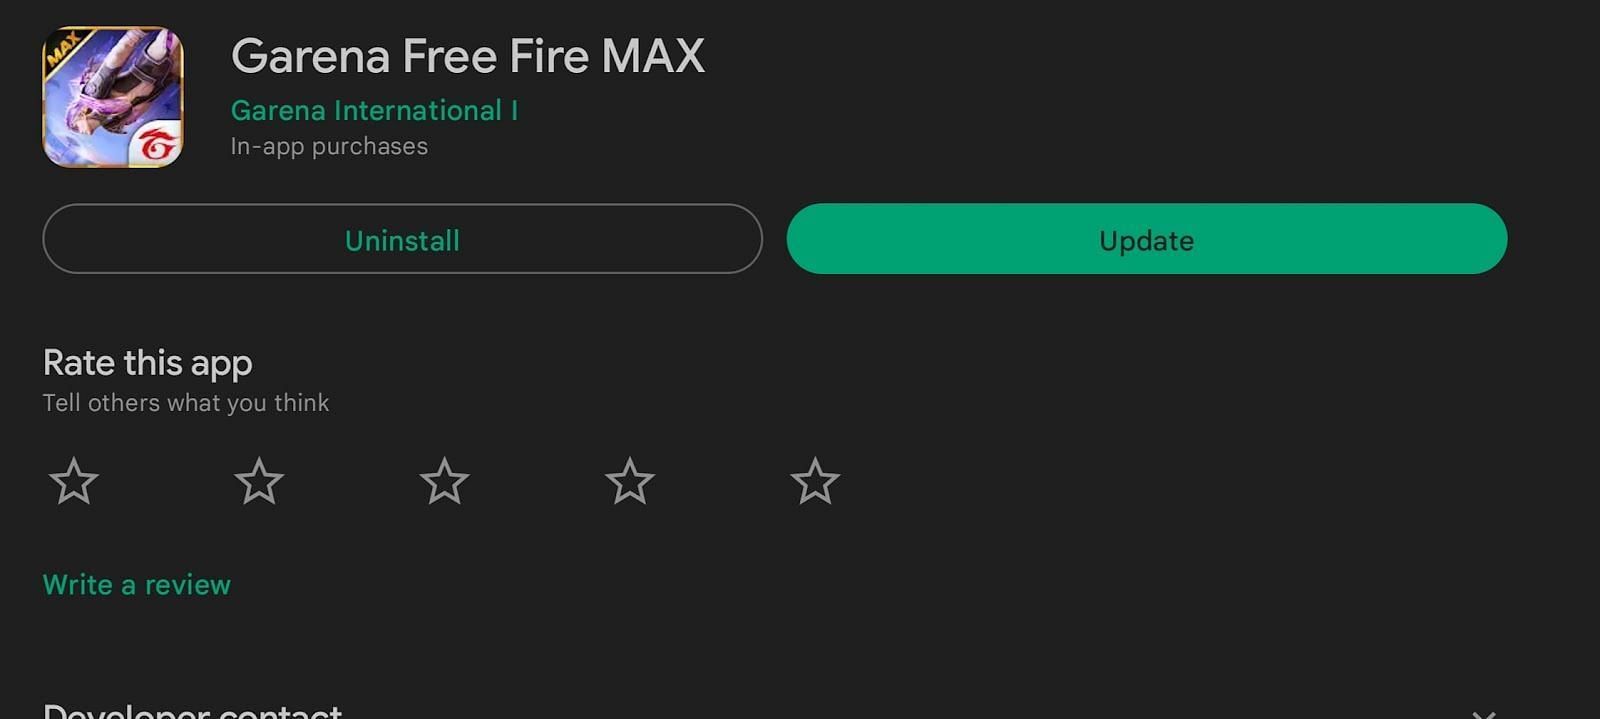 Indian users can install the MAX variant instead of the original game from the Play Store (Image via Google)